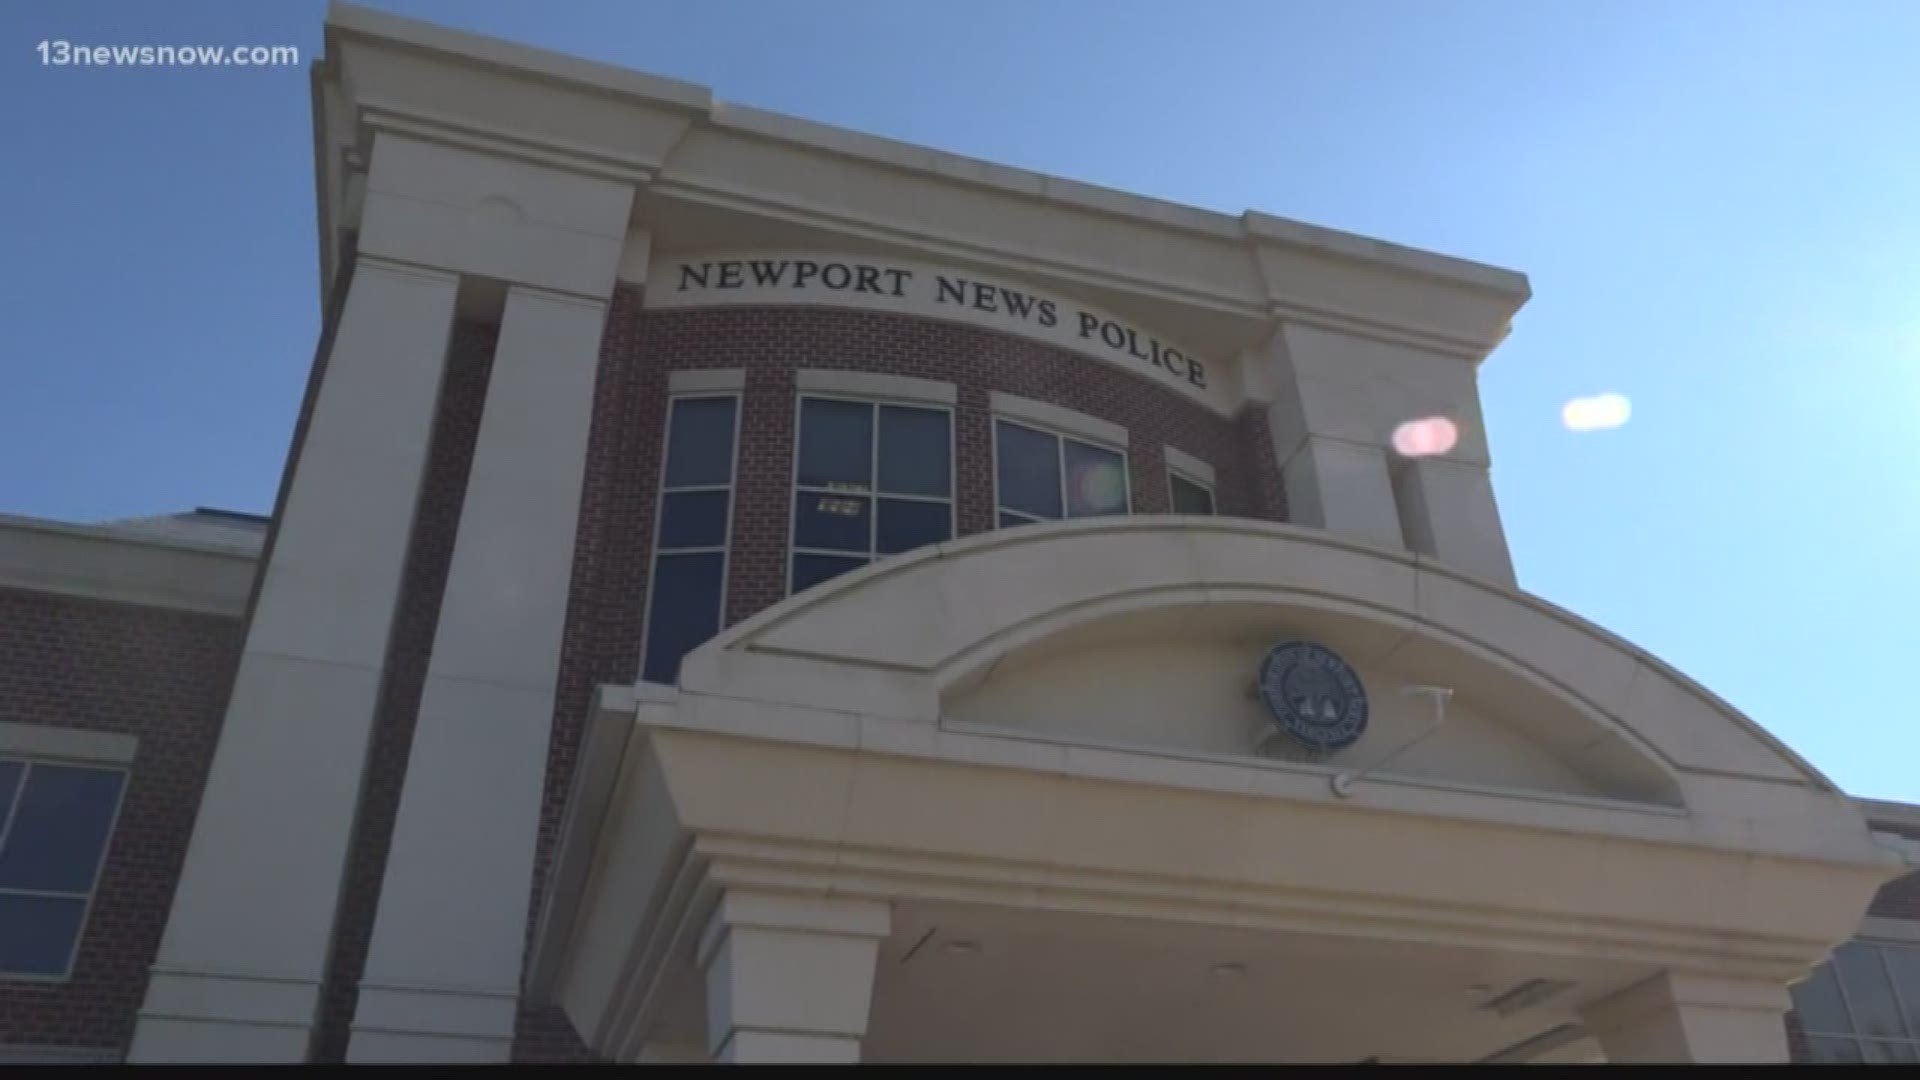 The Newport News Police Chief Steve Drew talked about the decrease in crime in the city.